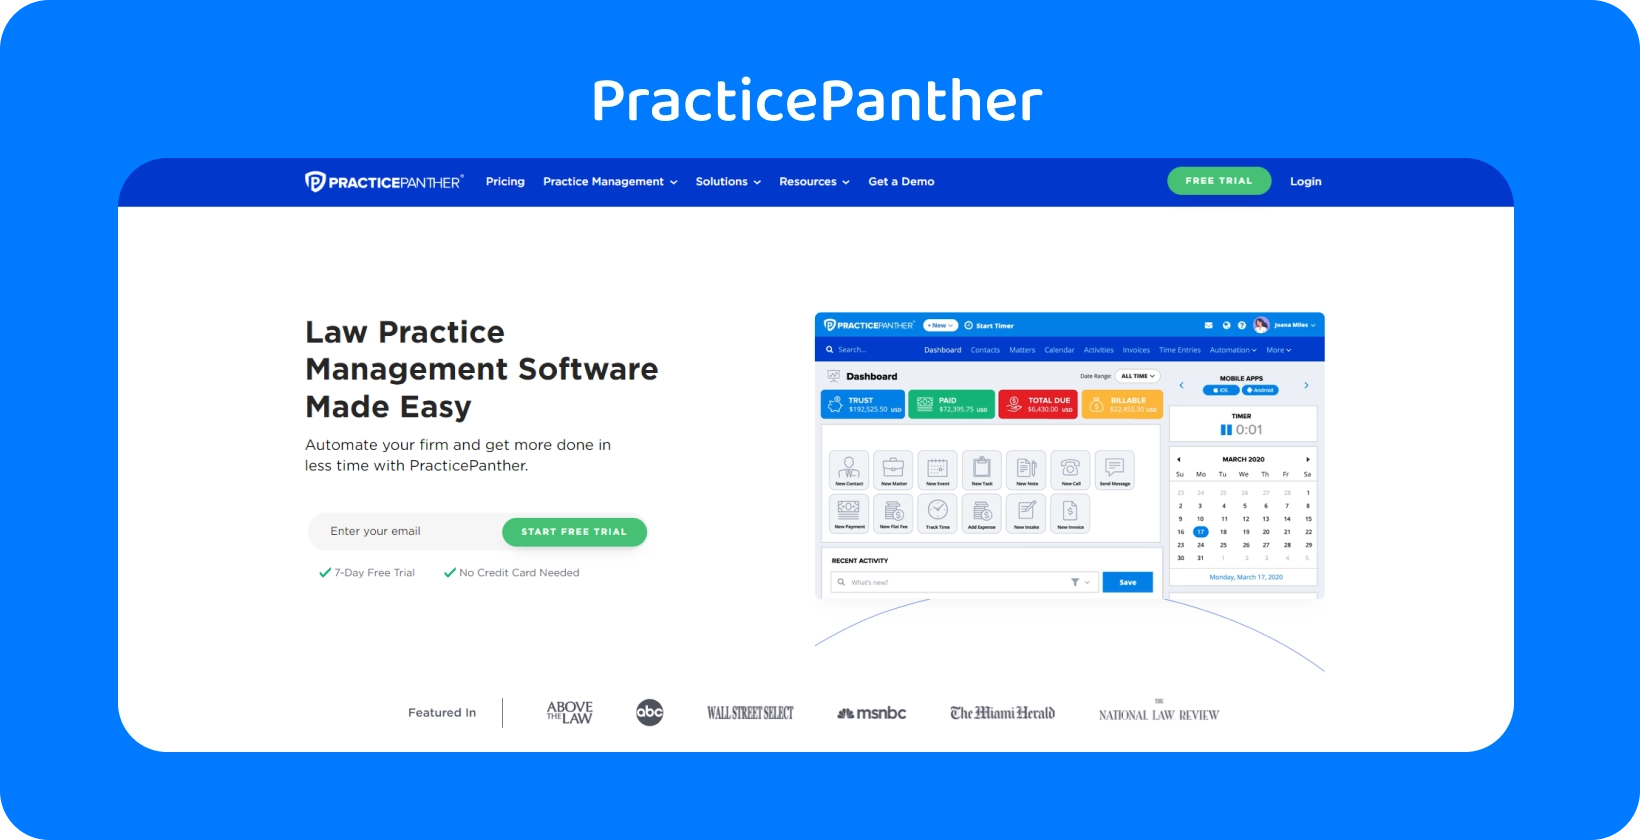 PracticePanther's dashboard, showcasing tools for law practice management.